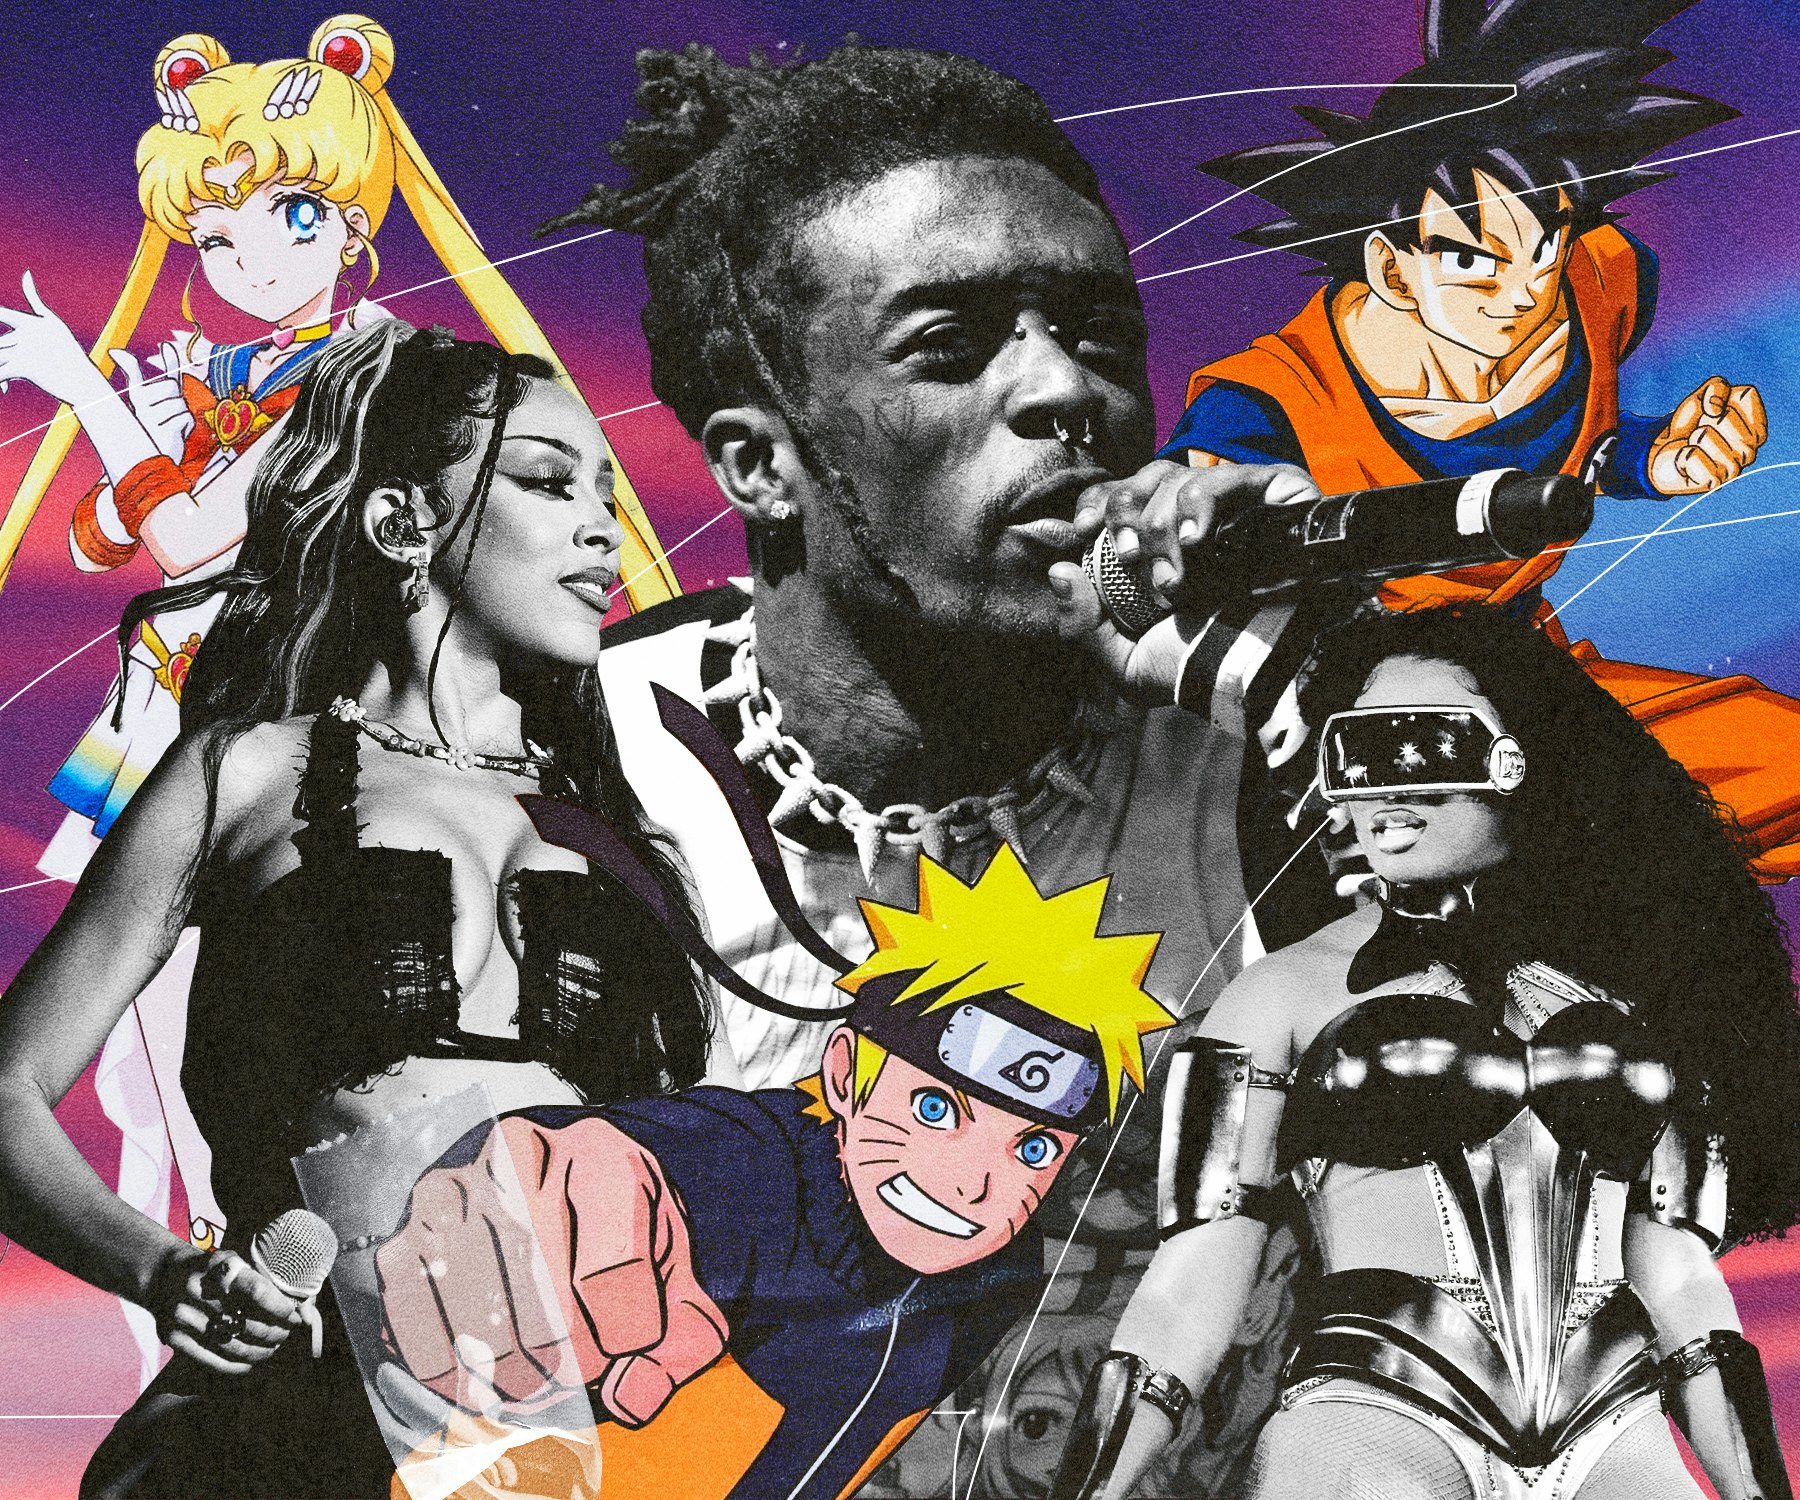 Masters Of The Underground on Twitter Rappers as anime characters  httpstcoifKnsYlVYe  Twitter